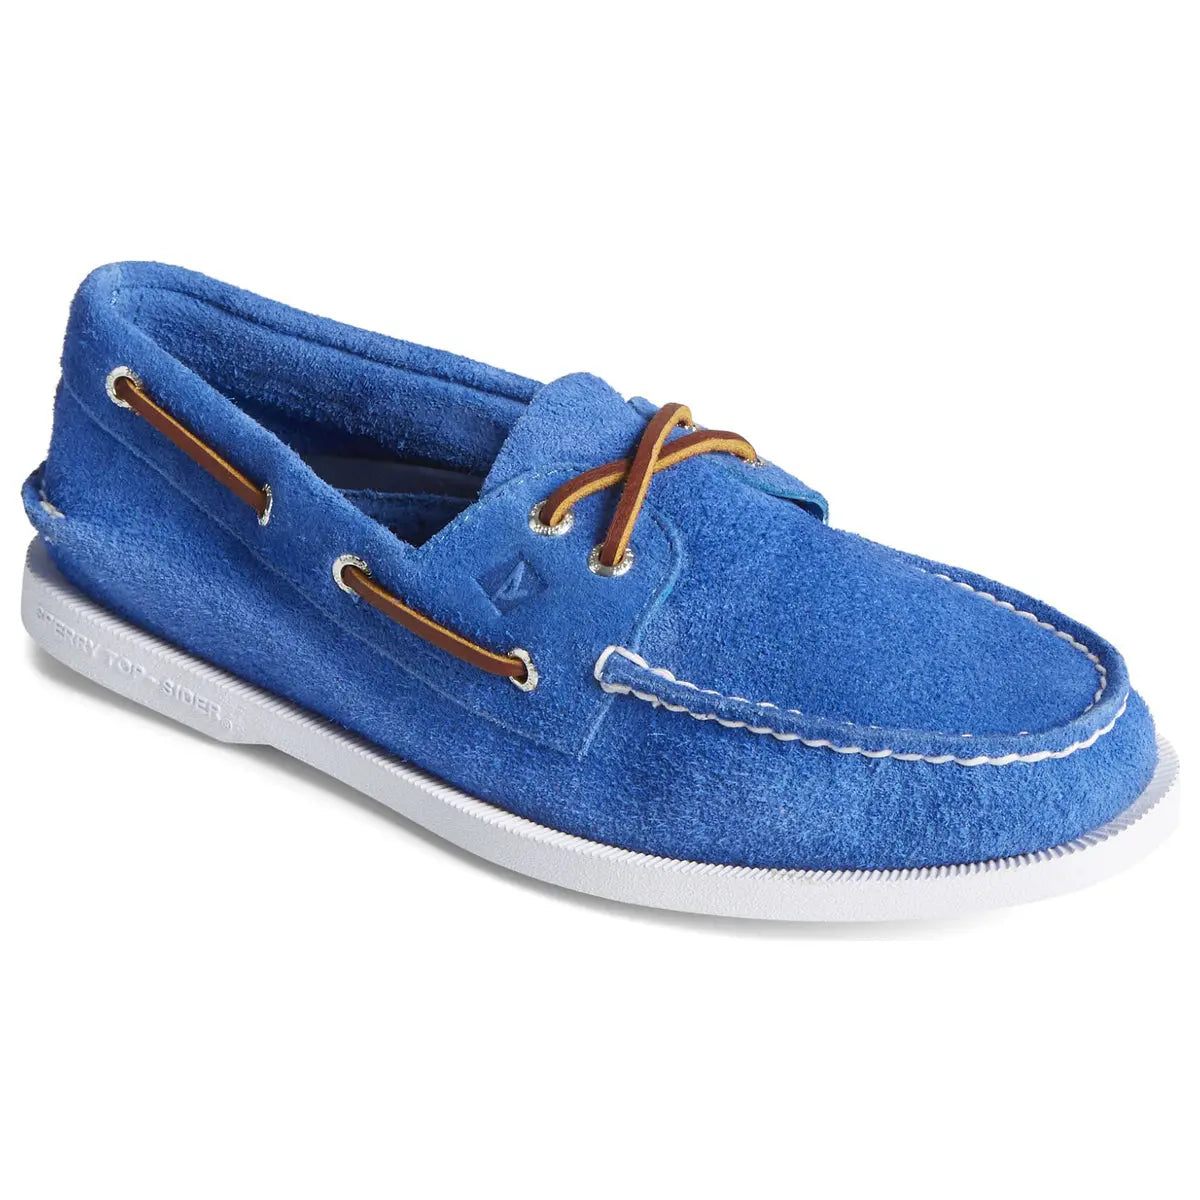 Blue Suede Authentic Original 2-Eye Boat Shoe  Sperry   